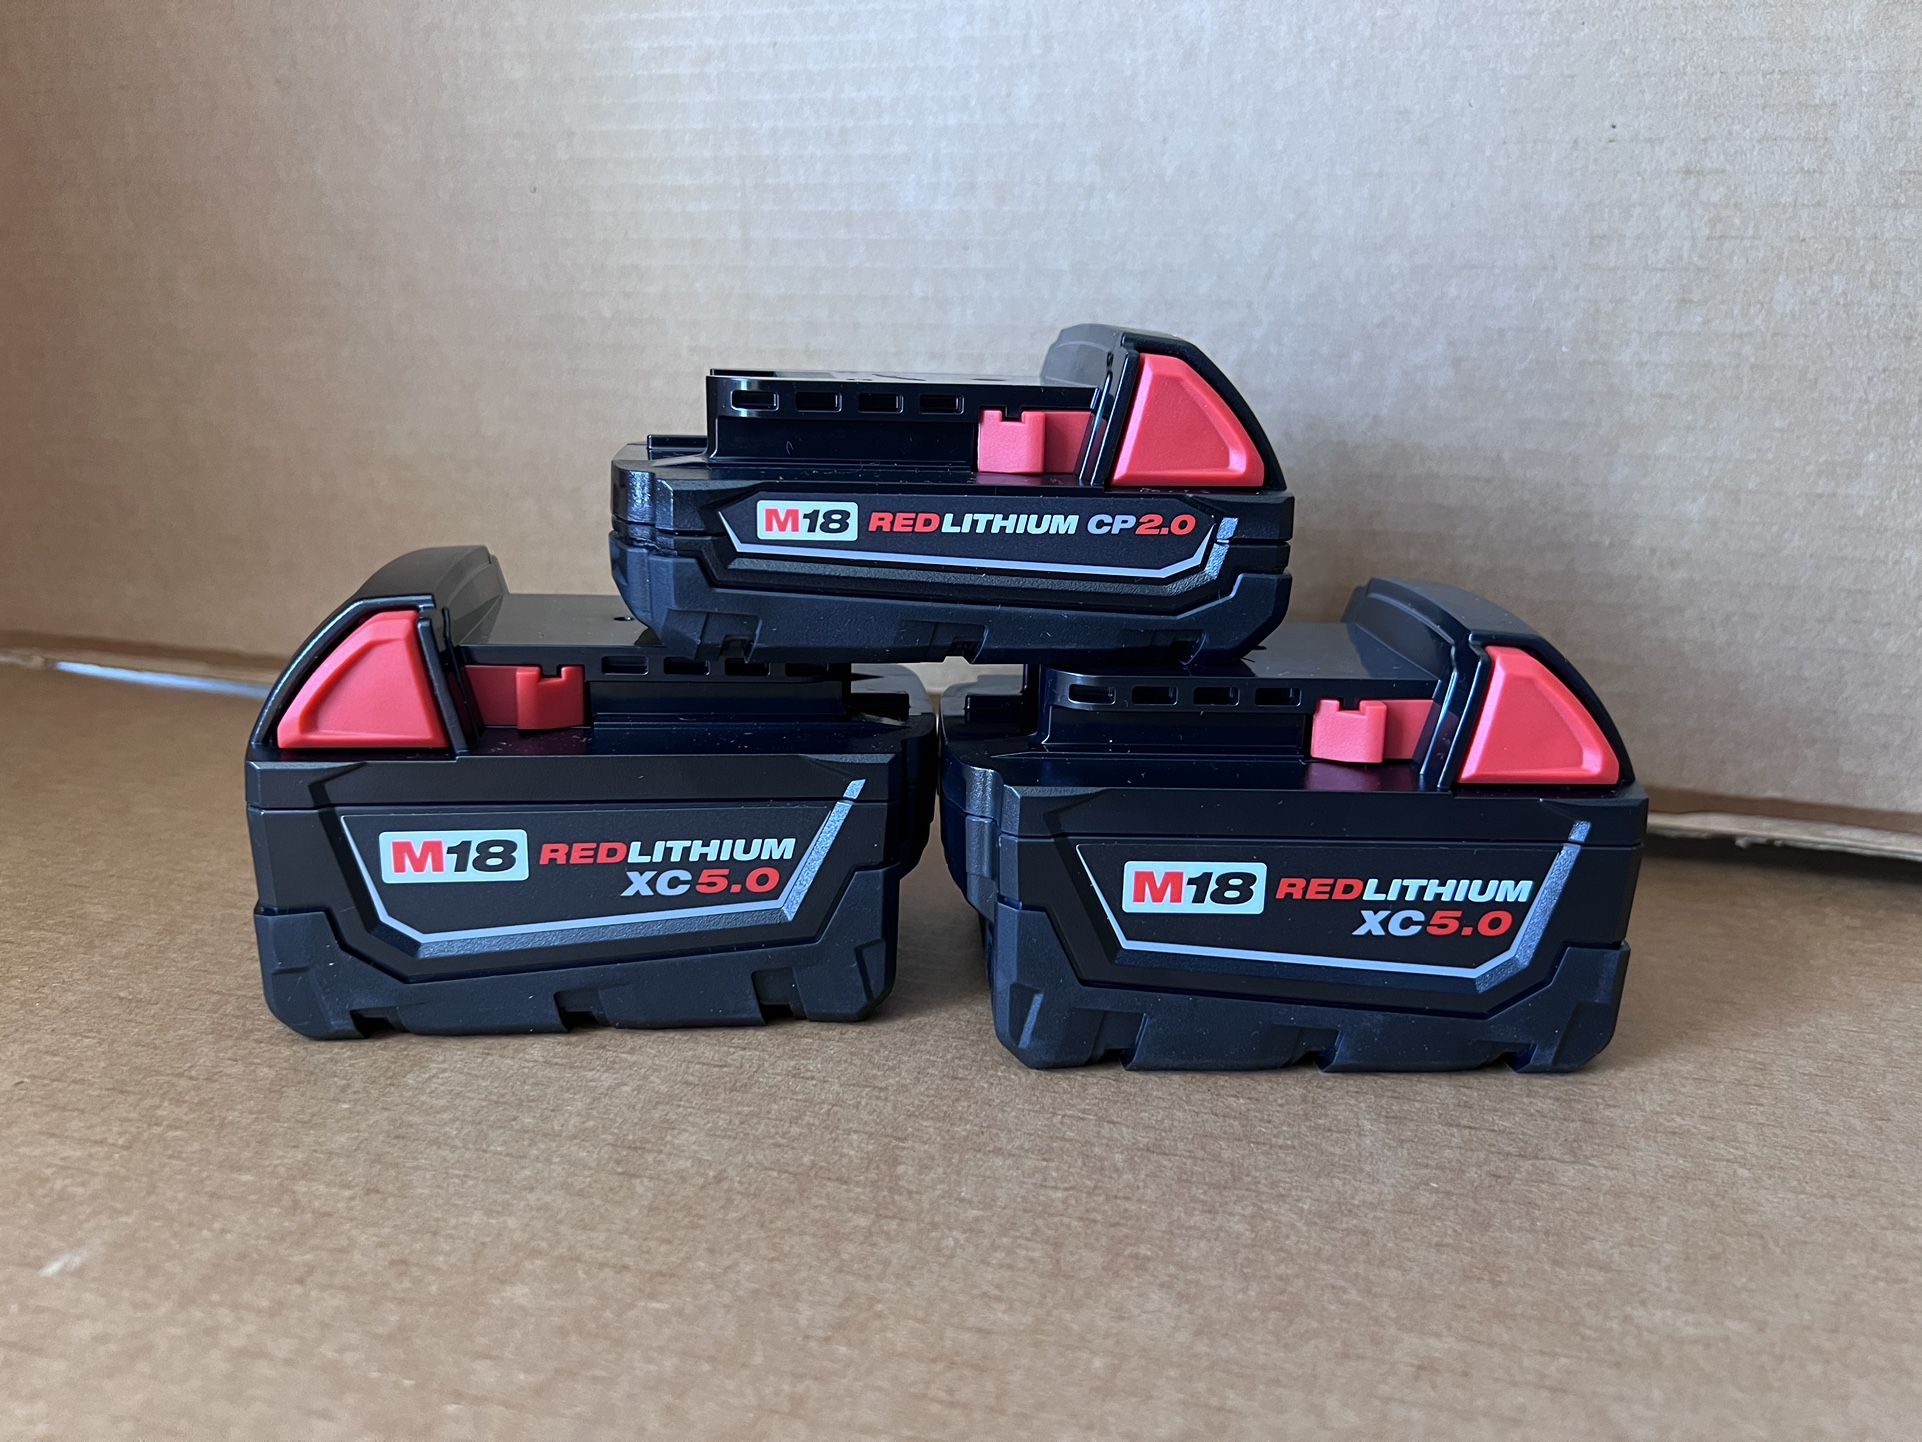 M18 5.0  And  M18 2.0  Milwaukee  Batteries 